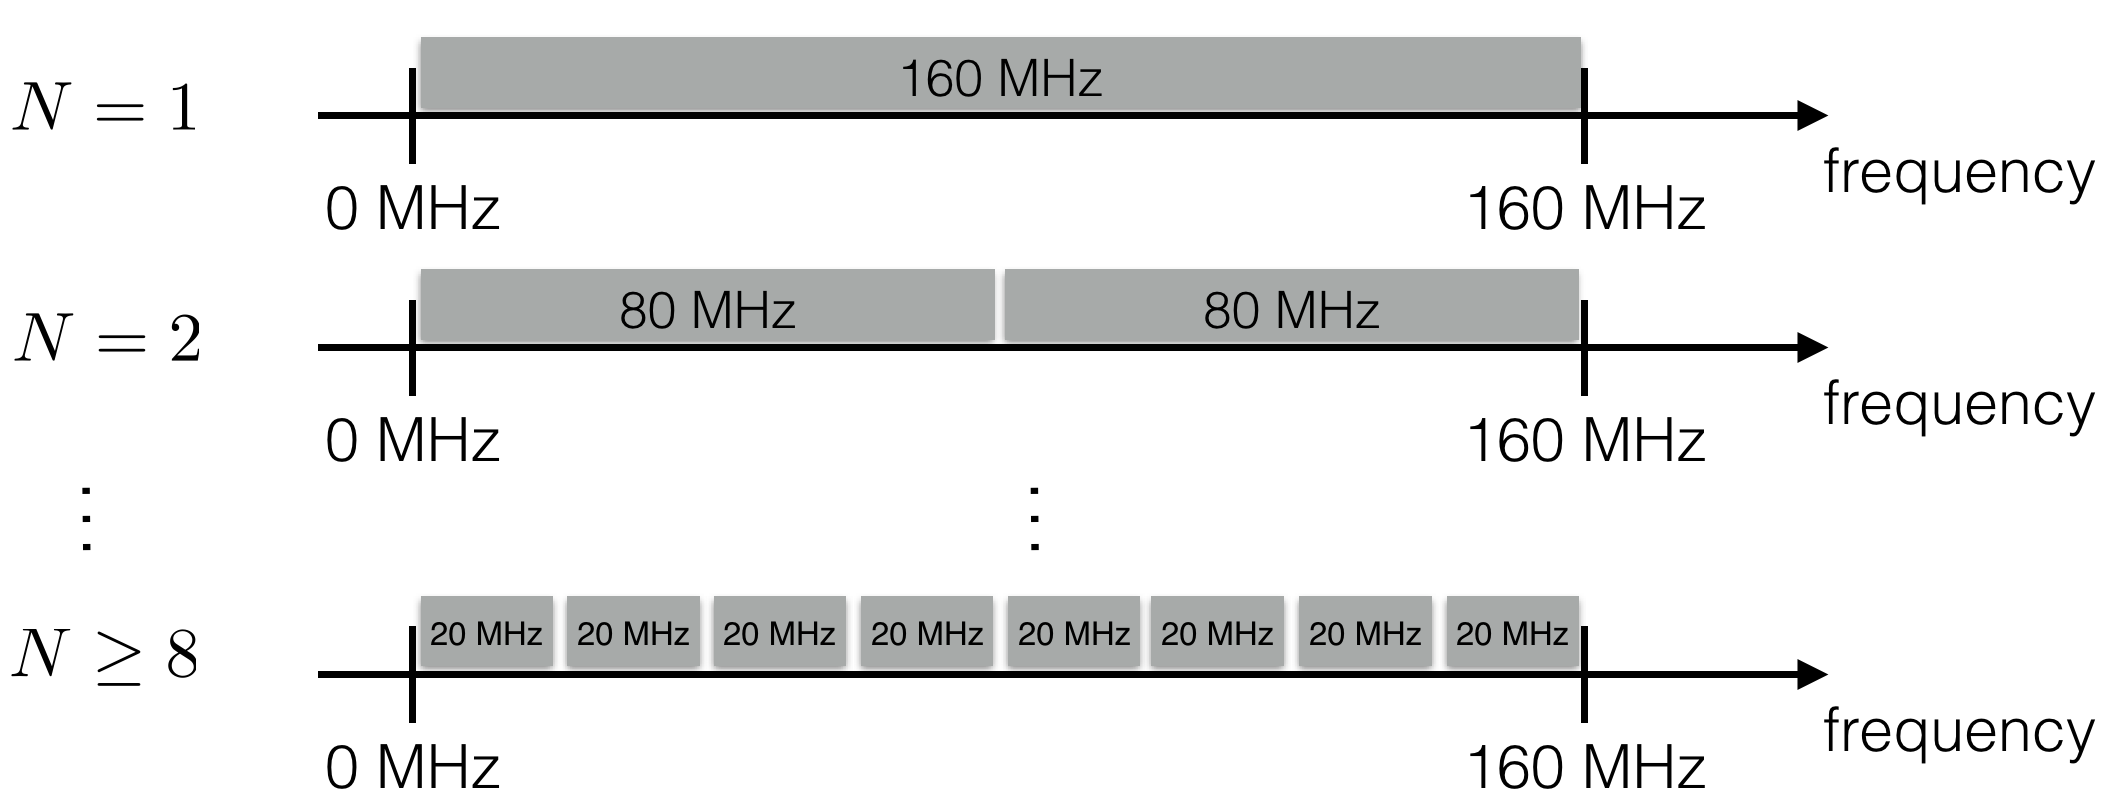 Ideal allocations of frequency bands